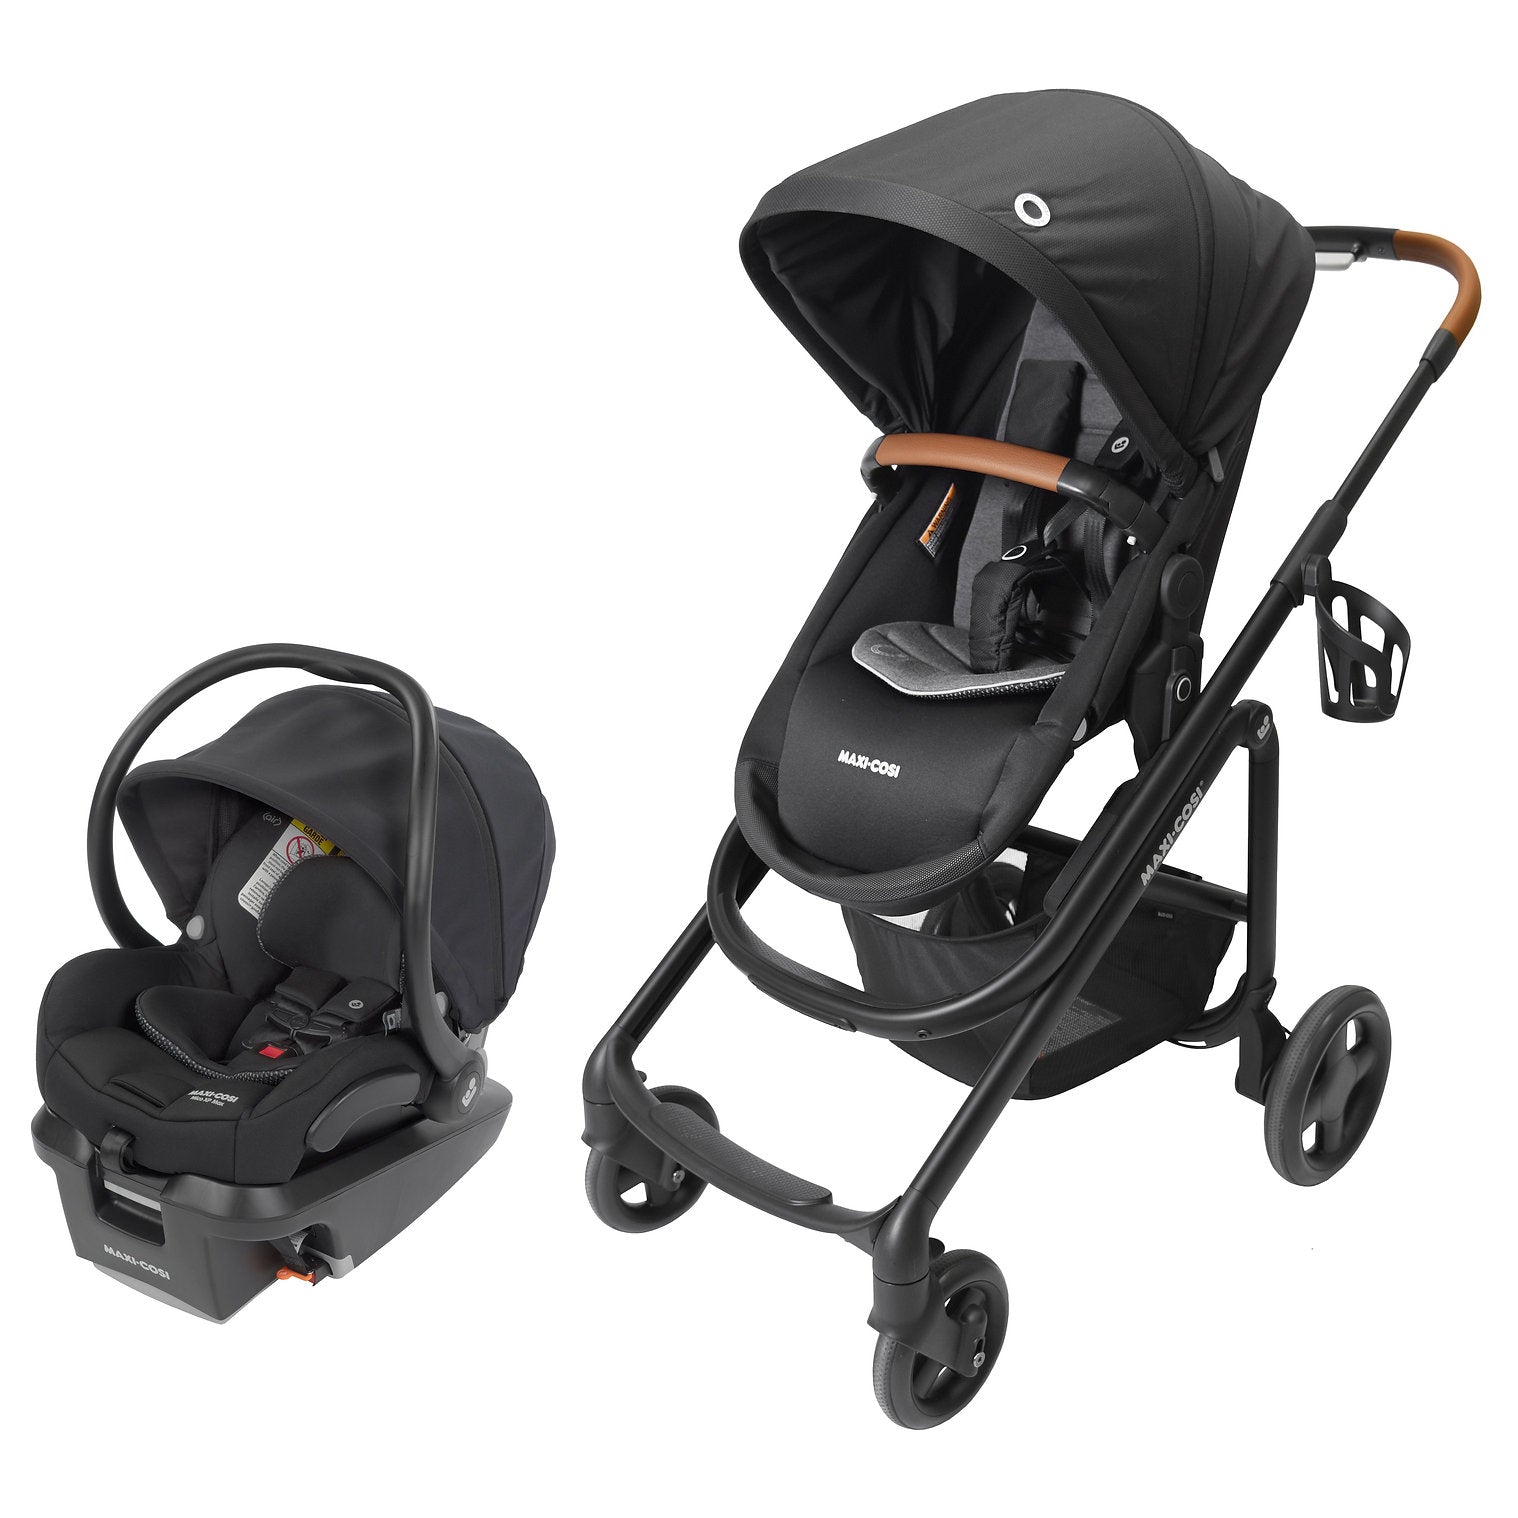 Maxi-Cosi Lila CP Stroller Travel System with Mico XP Max Infant Seat - Essential Black